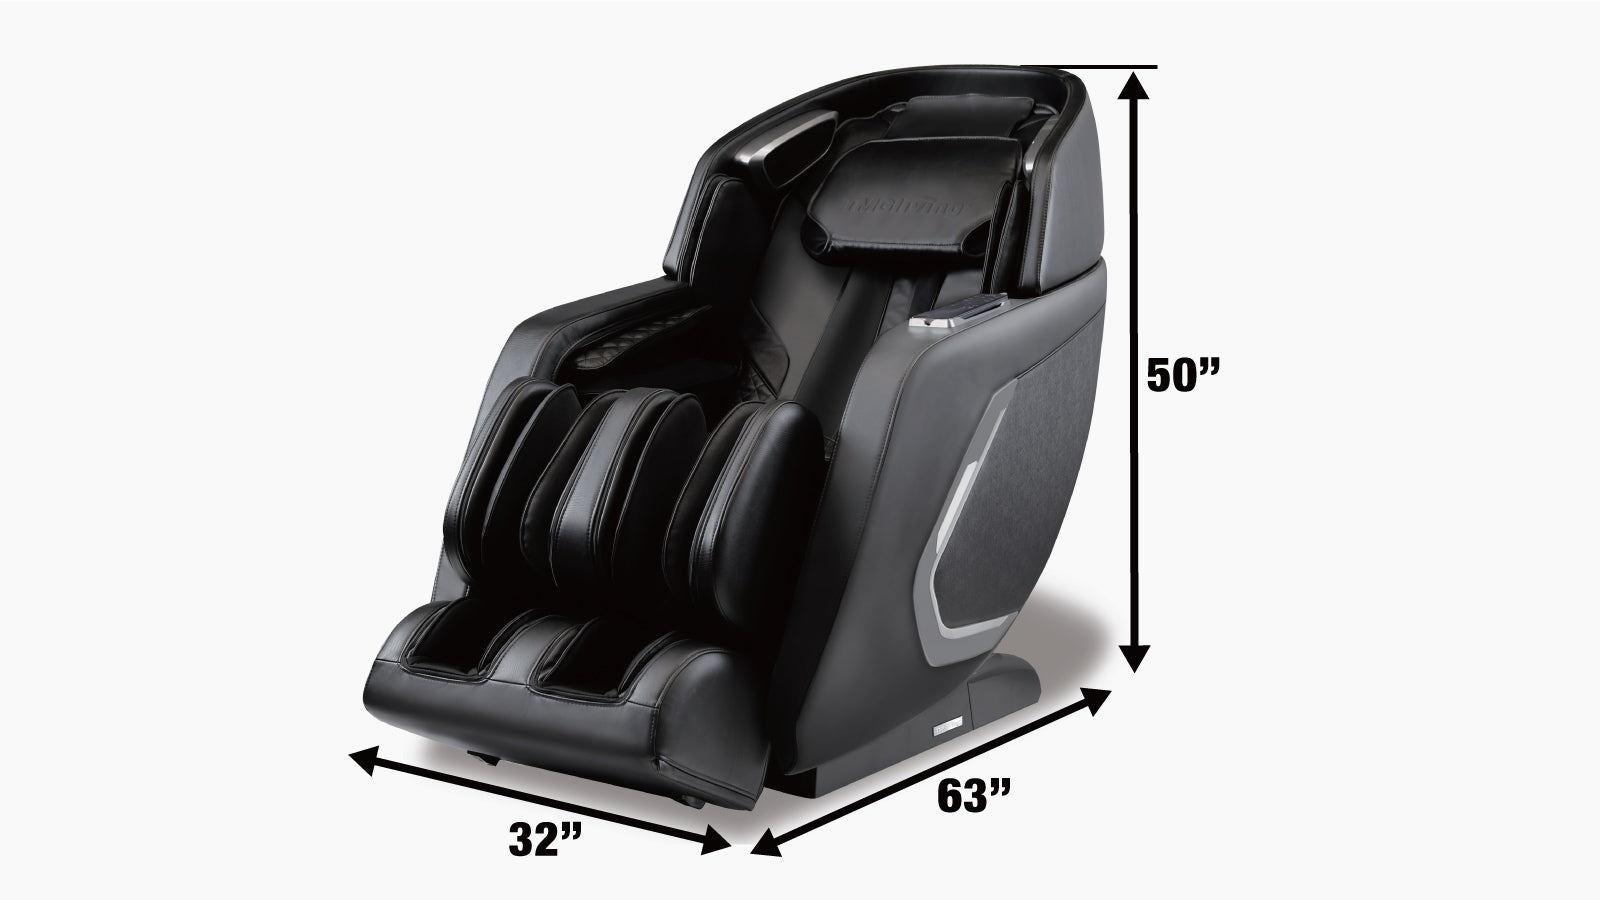 TMG Industrial Zero Gravity Multi-Function Massage Chair Intelligent, 4D Mechanism, Triple Action Foot Massager, Voice Control, Full Body Compression, Bluetooth, Body Scanning, TMG-LMC58-specifications-image